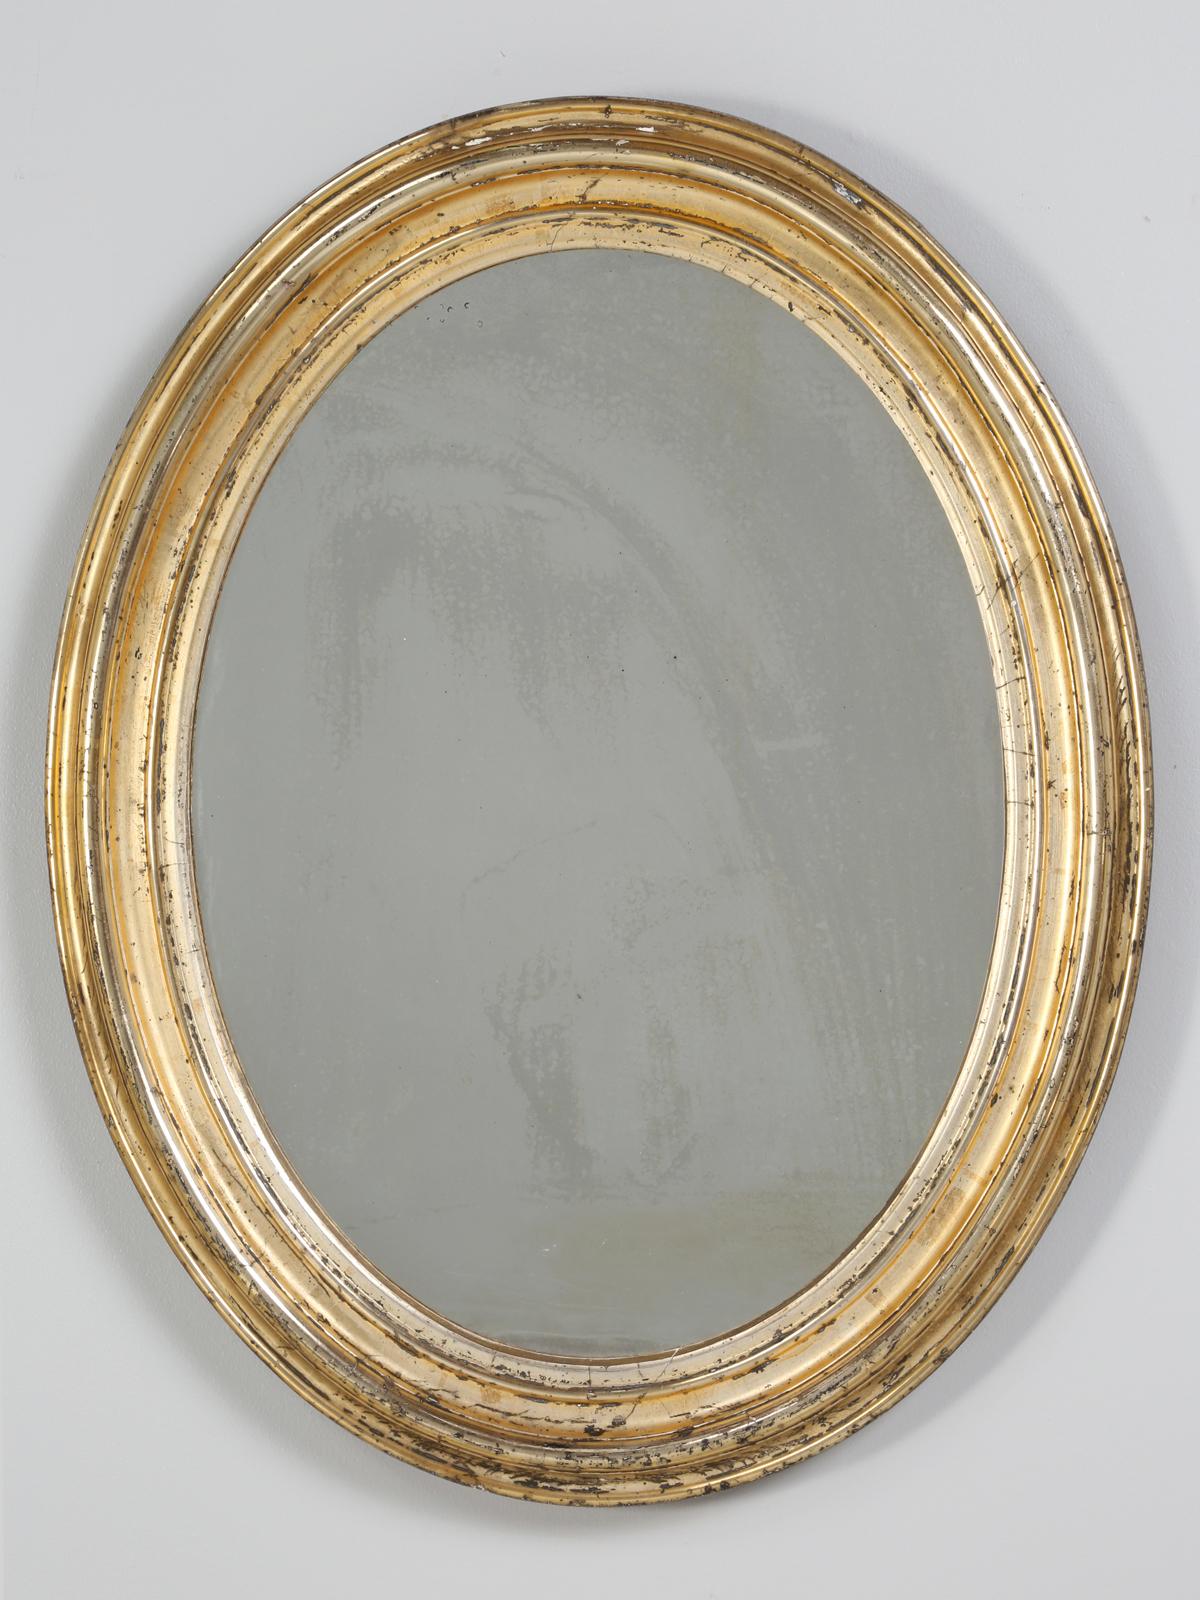 Antique French gilt oval mirror and unusual that it still retains the original 24-karat water gilding finish. Most of the French antique oval mirrors we see, have been touched up, with what looks like the old fashion gold radiator paint. This